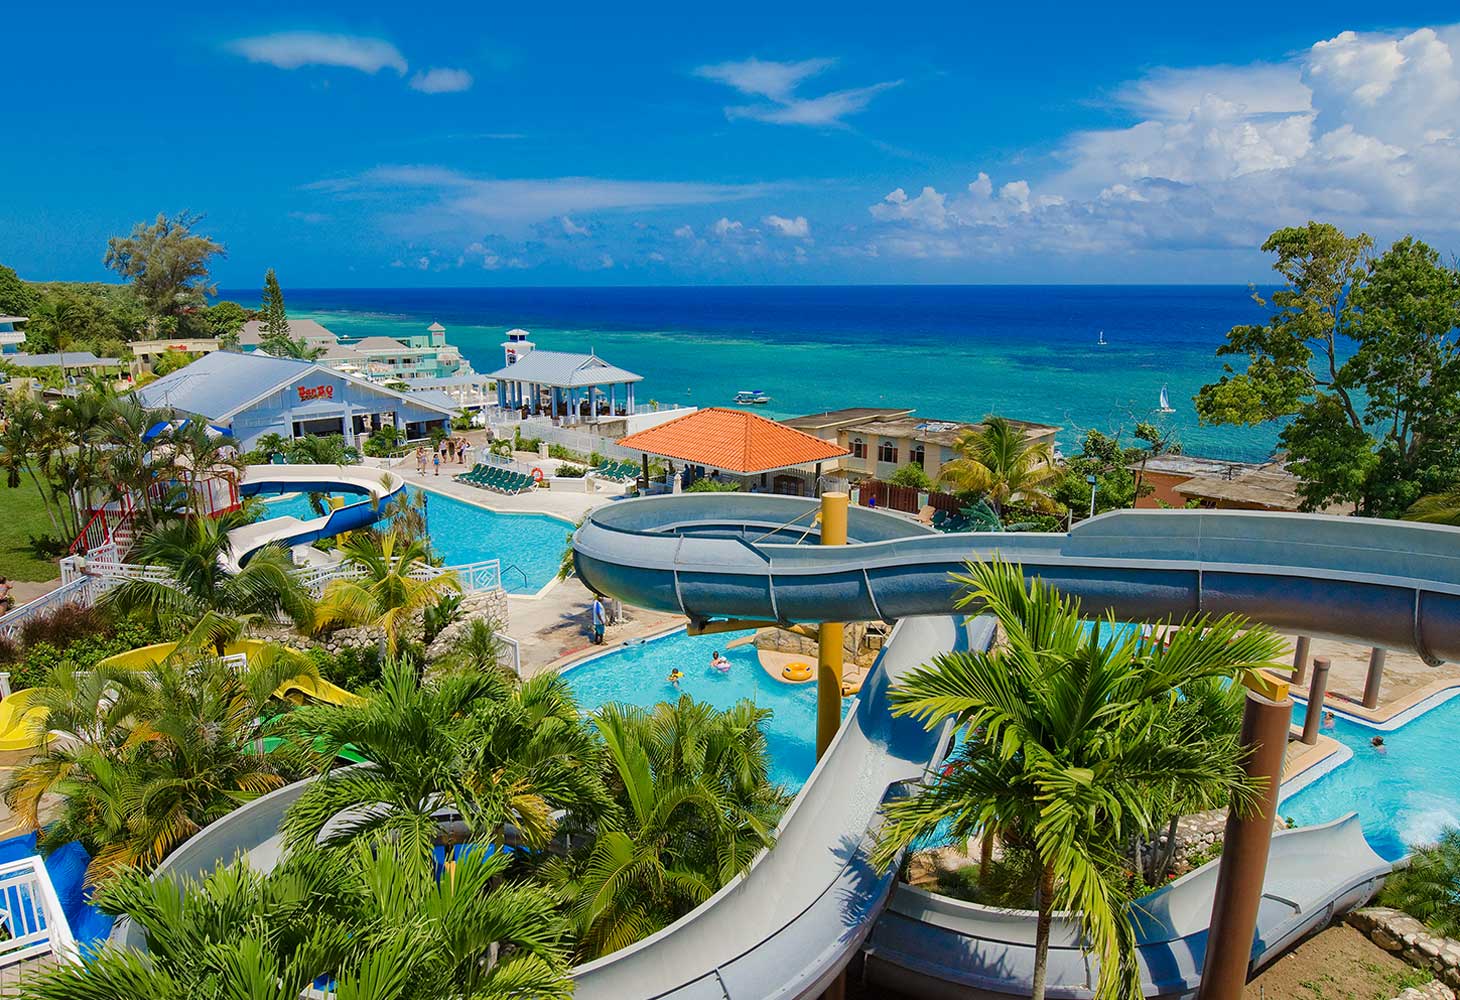 Which Beaches Resorts have Waterparks?